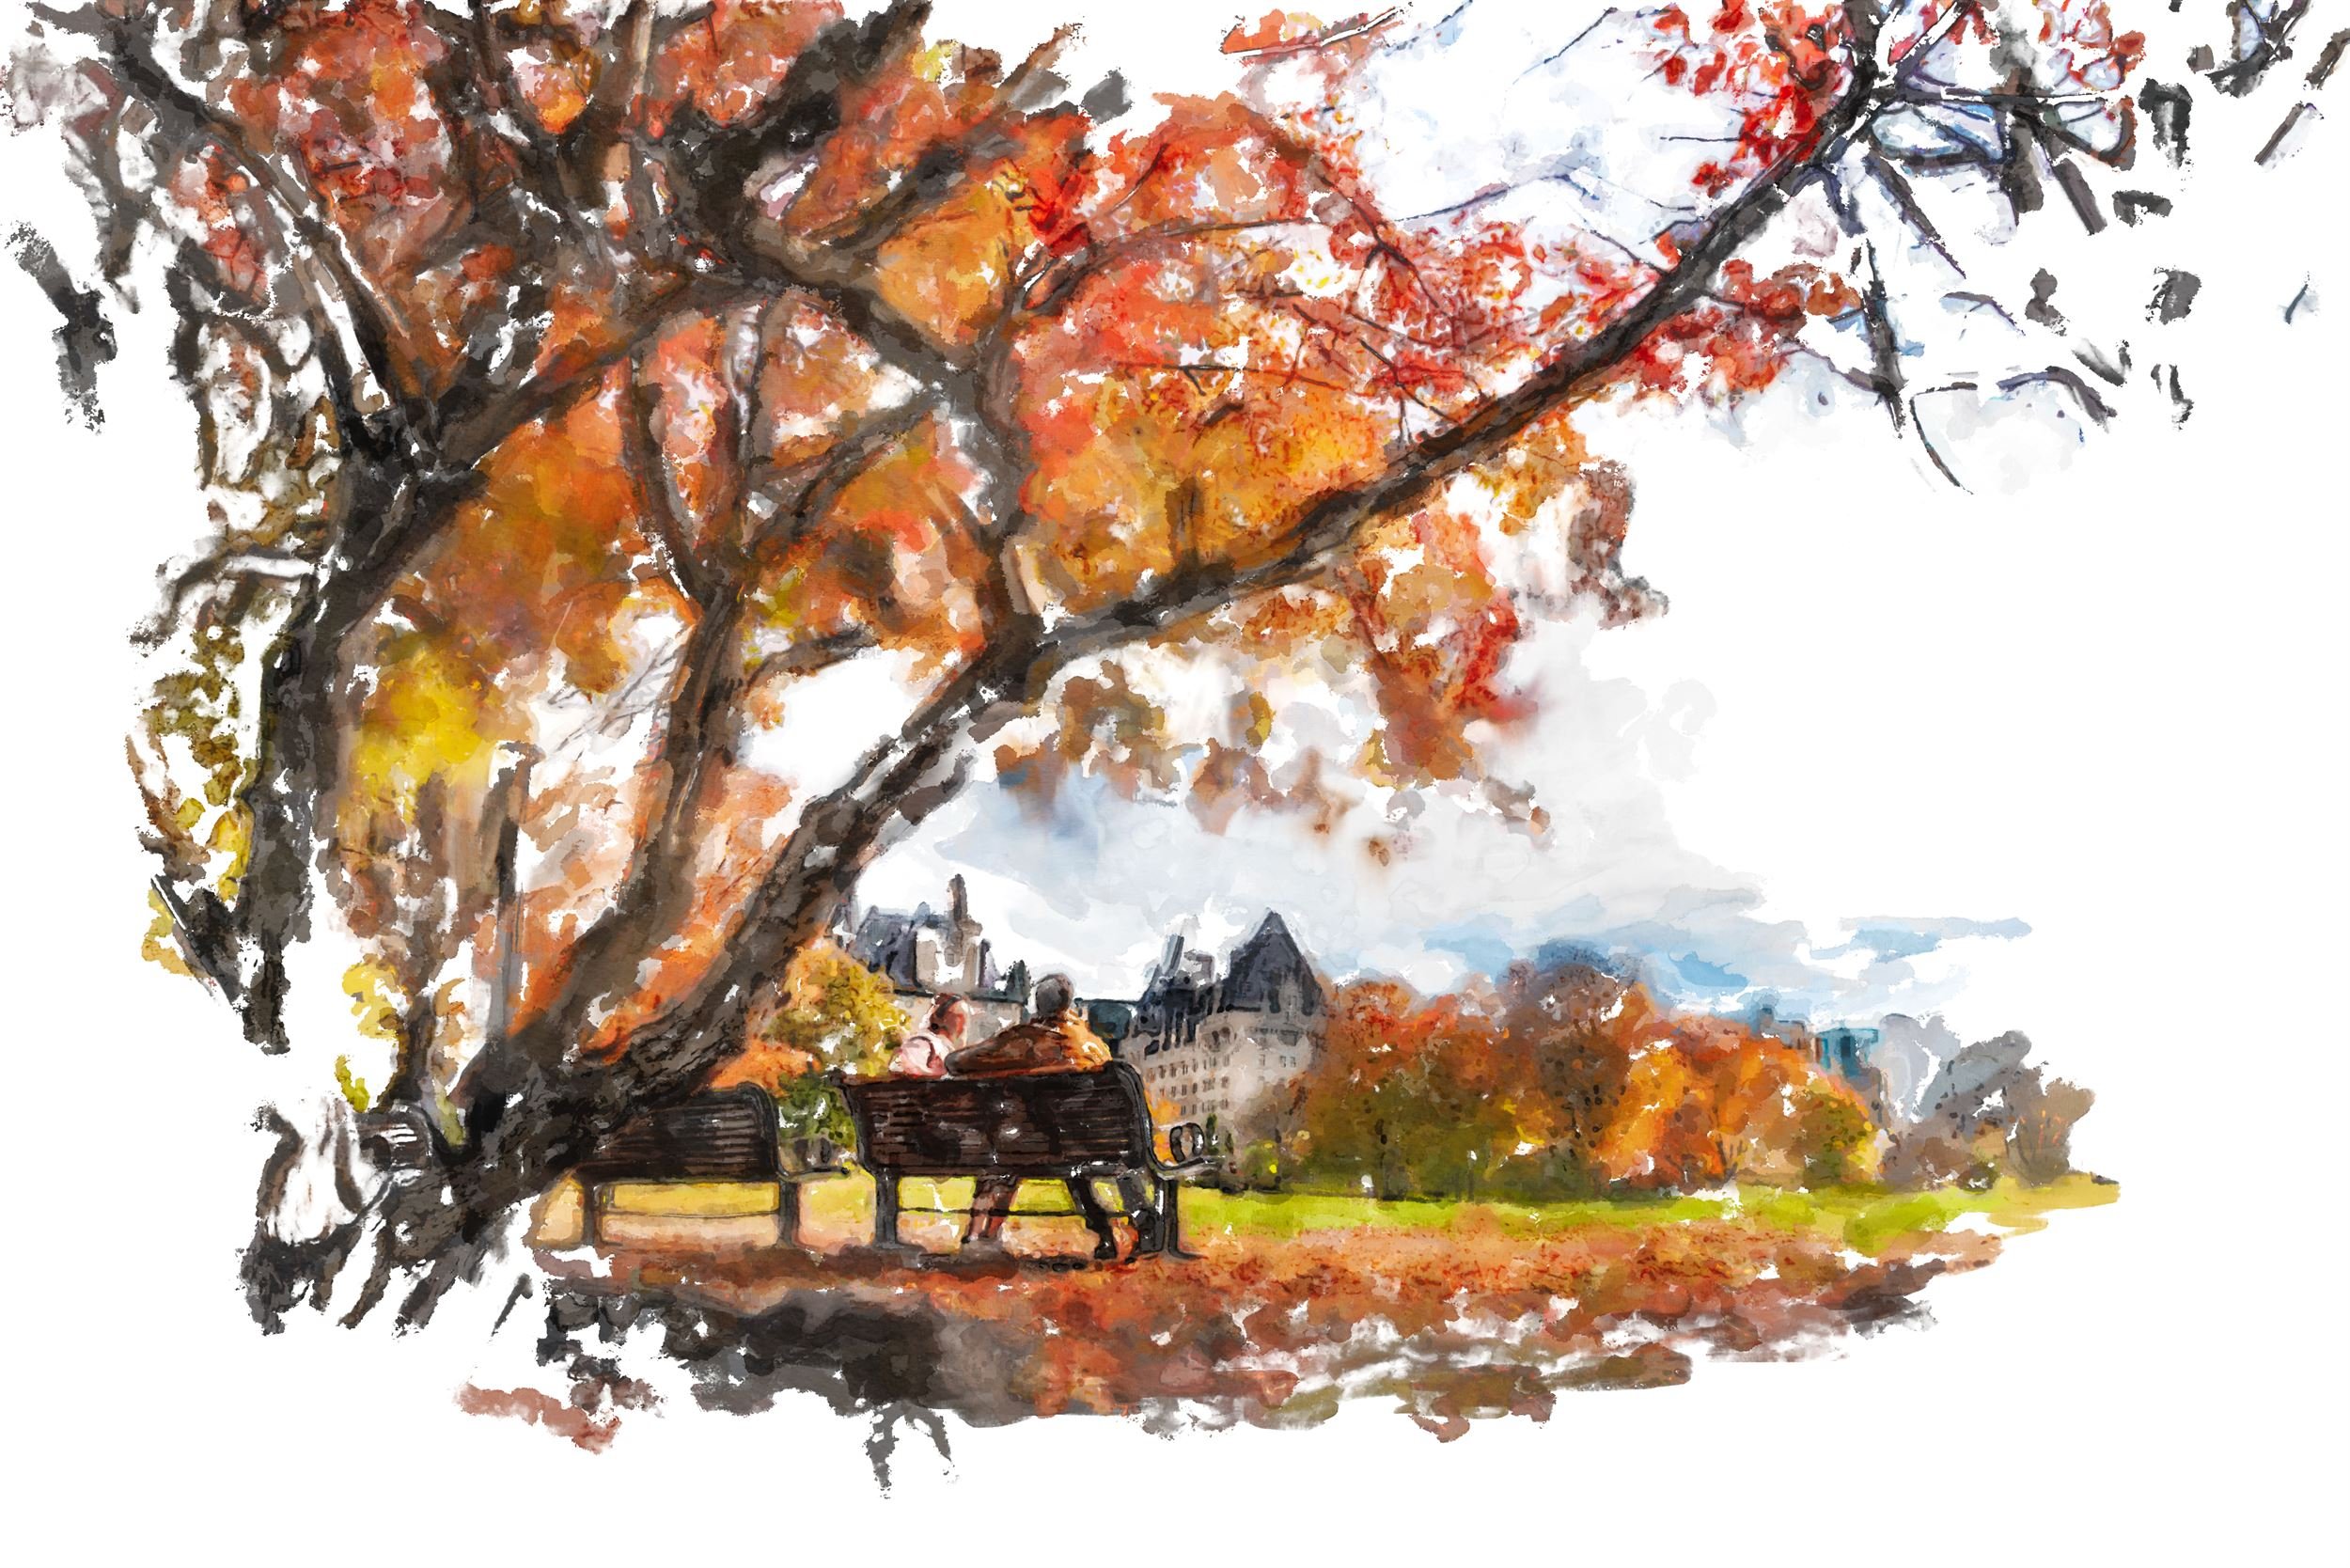 Watercolor Sketch Photo Effect - fall image example.